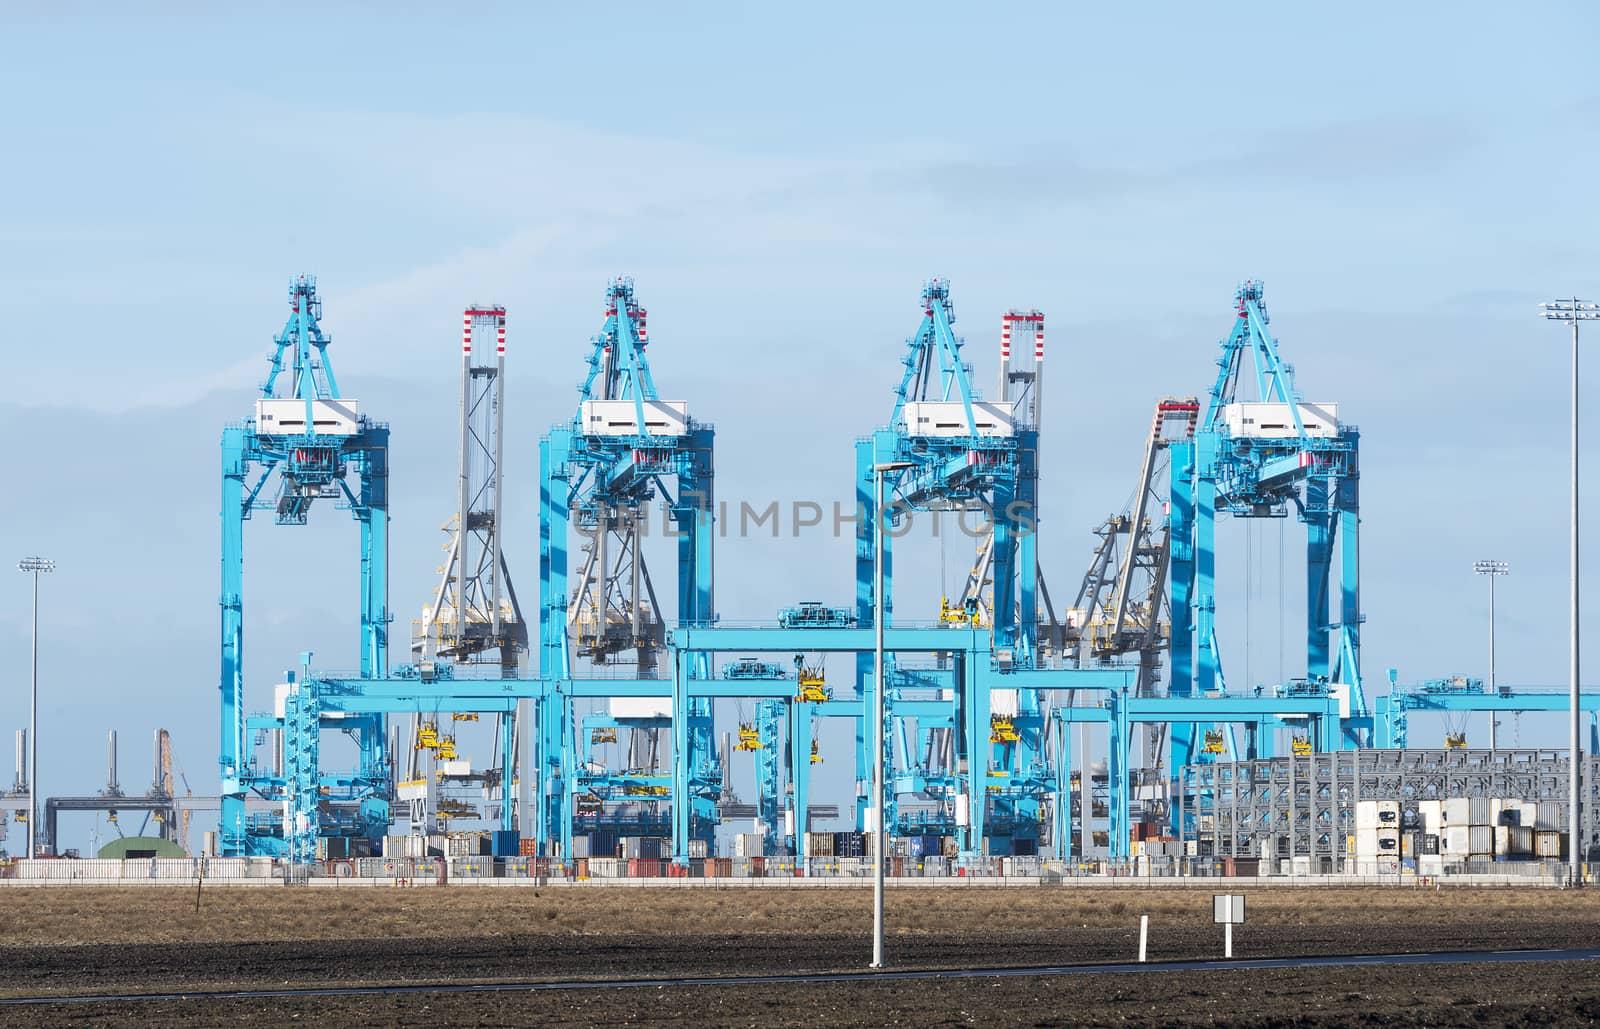 new industrial cranes in the europoort by compuinfoto